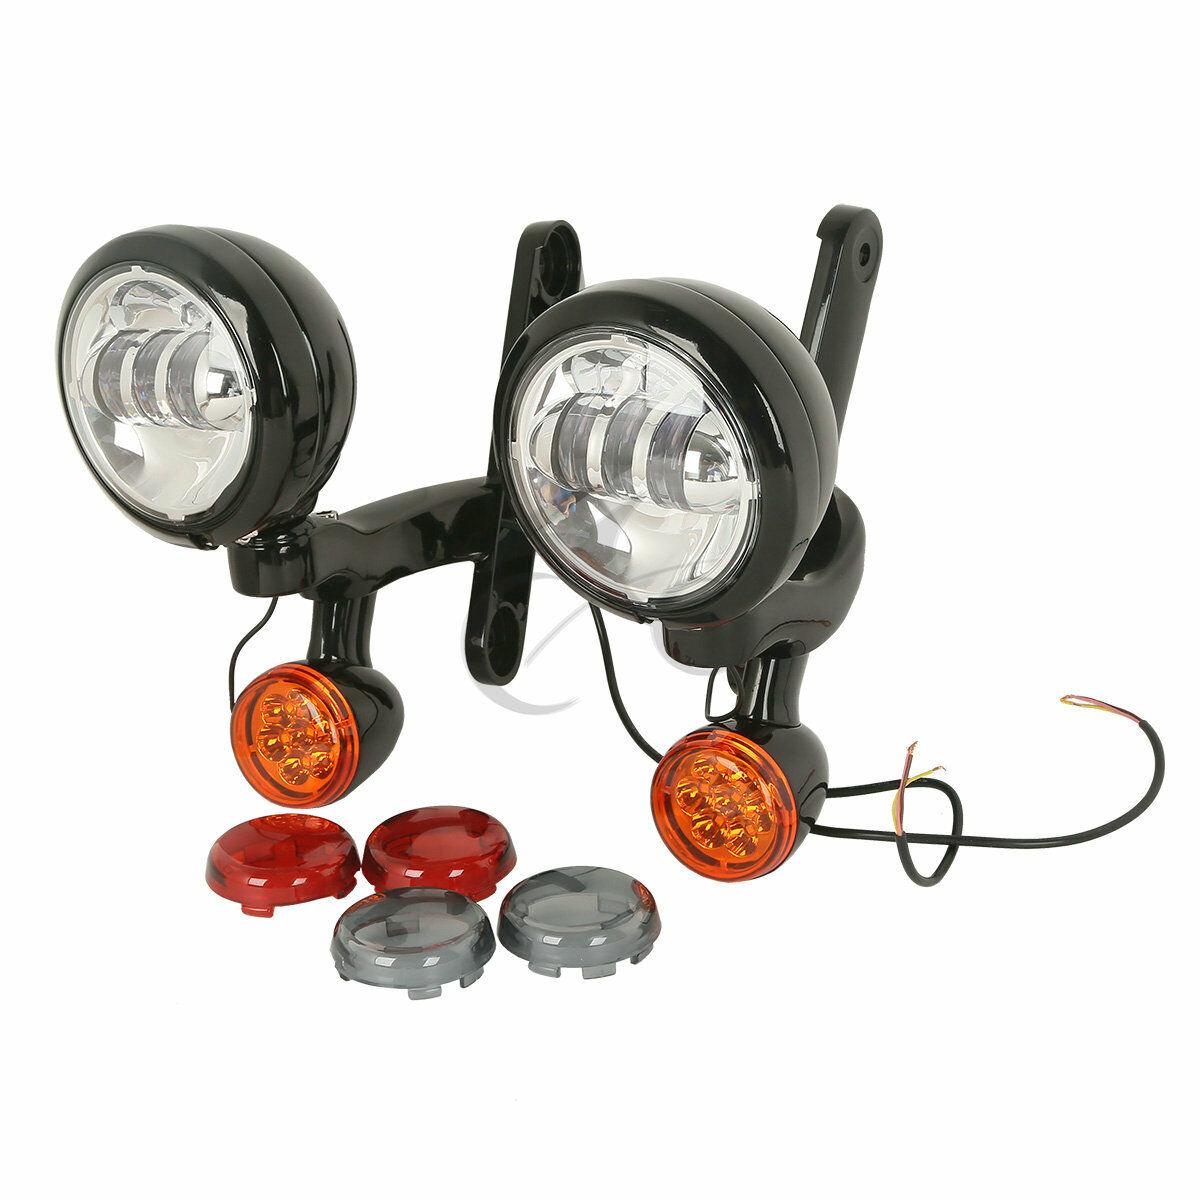 4.5" Auxiliary Fog Light Bracket Turn Signal For Harley Touring Road King 14-Up - Moto Life Products